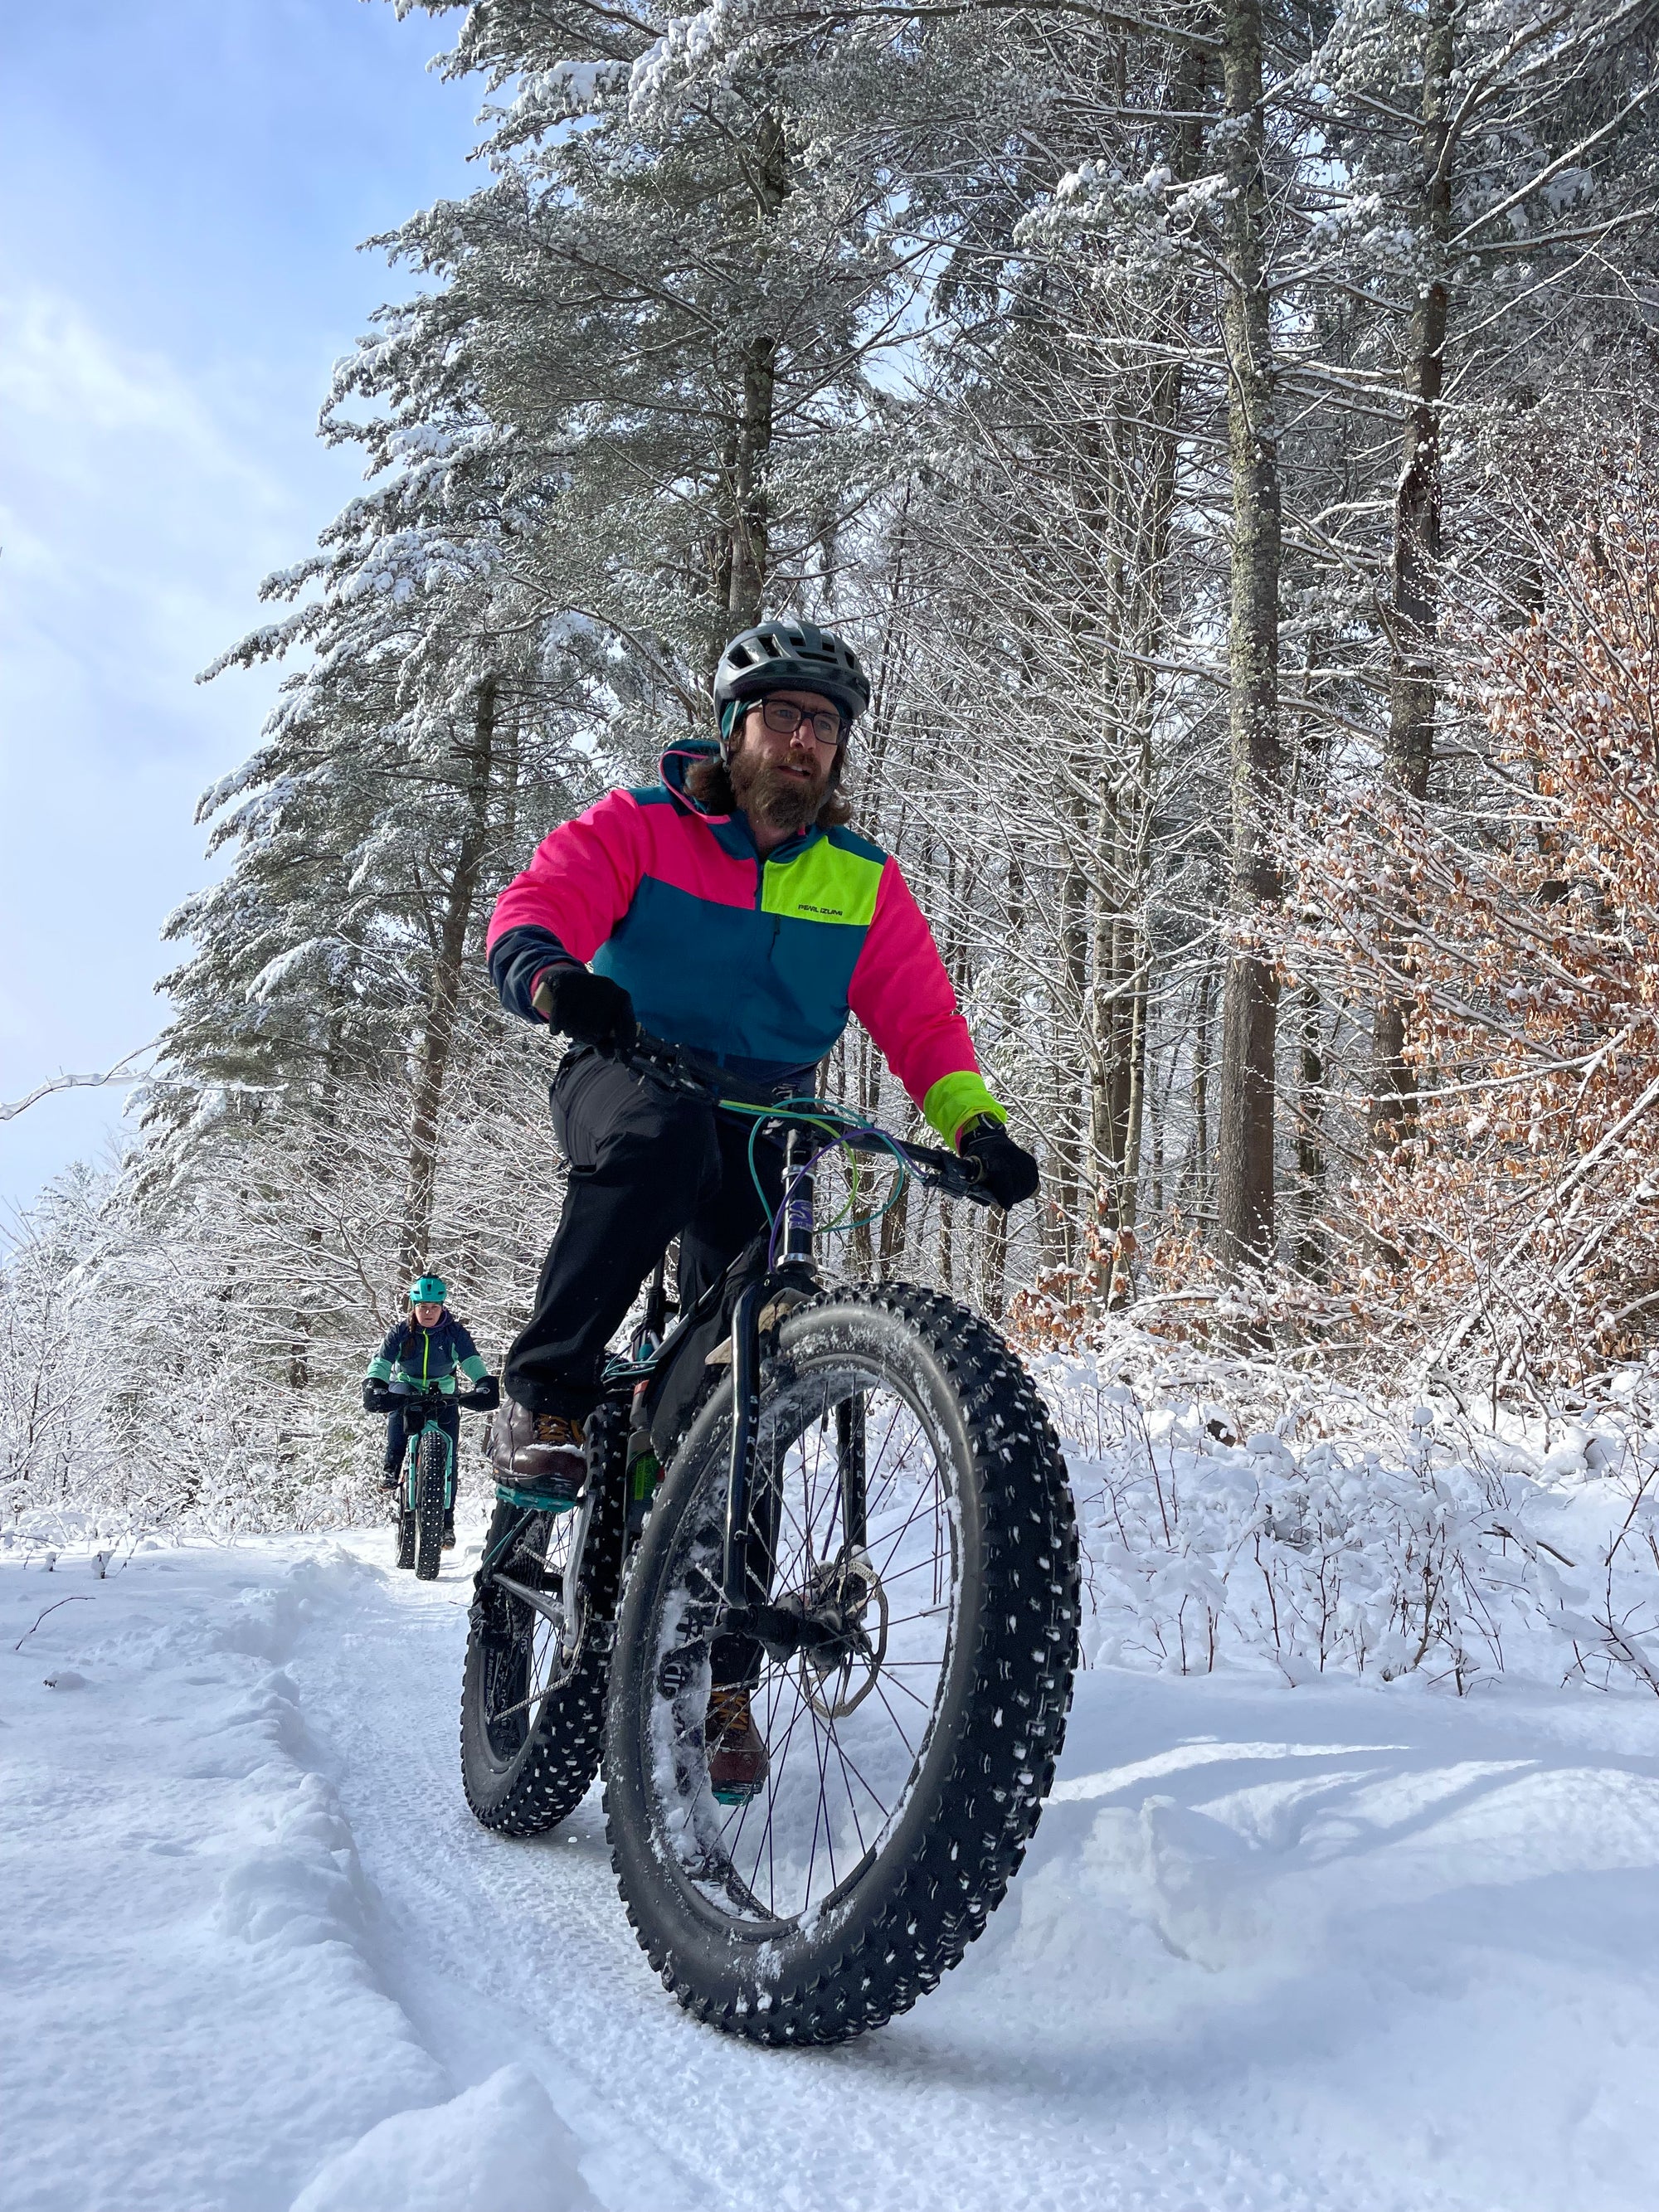 A fat biker in a bright pink, yellow and teal jacket riding on a packed snowy trail